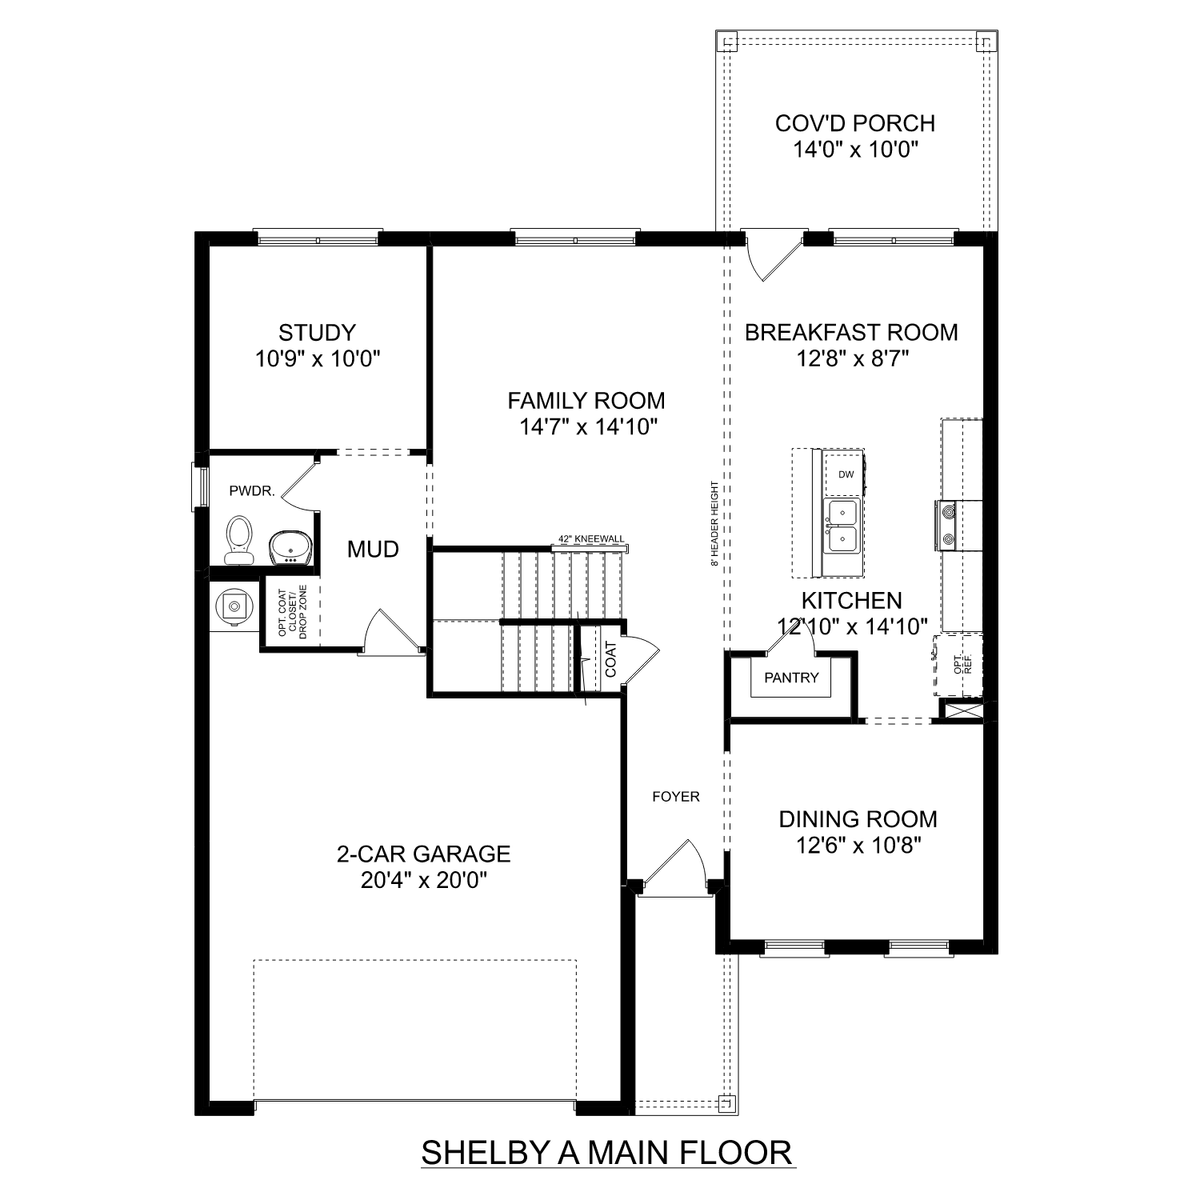 1 - The Shelby A floor plan layout for 4014 Rockland Circle in Davidson Homes' Monteagle Cove community.